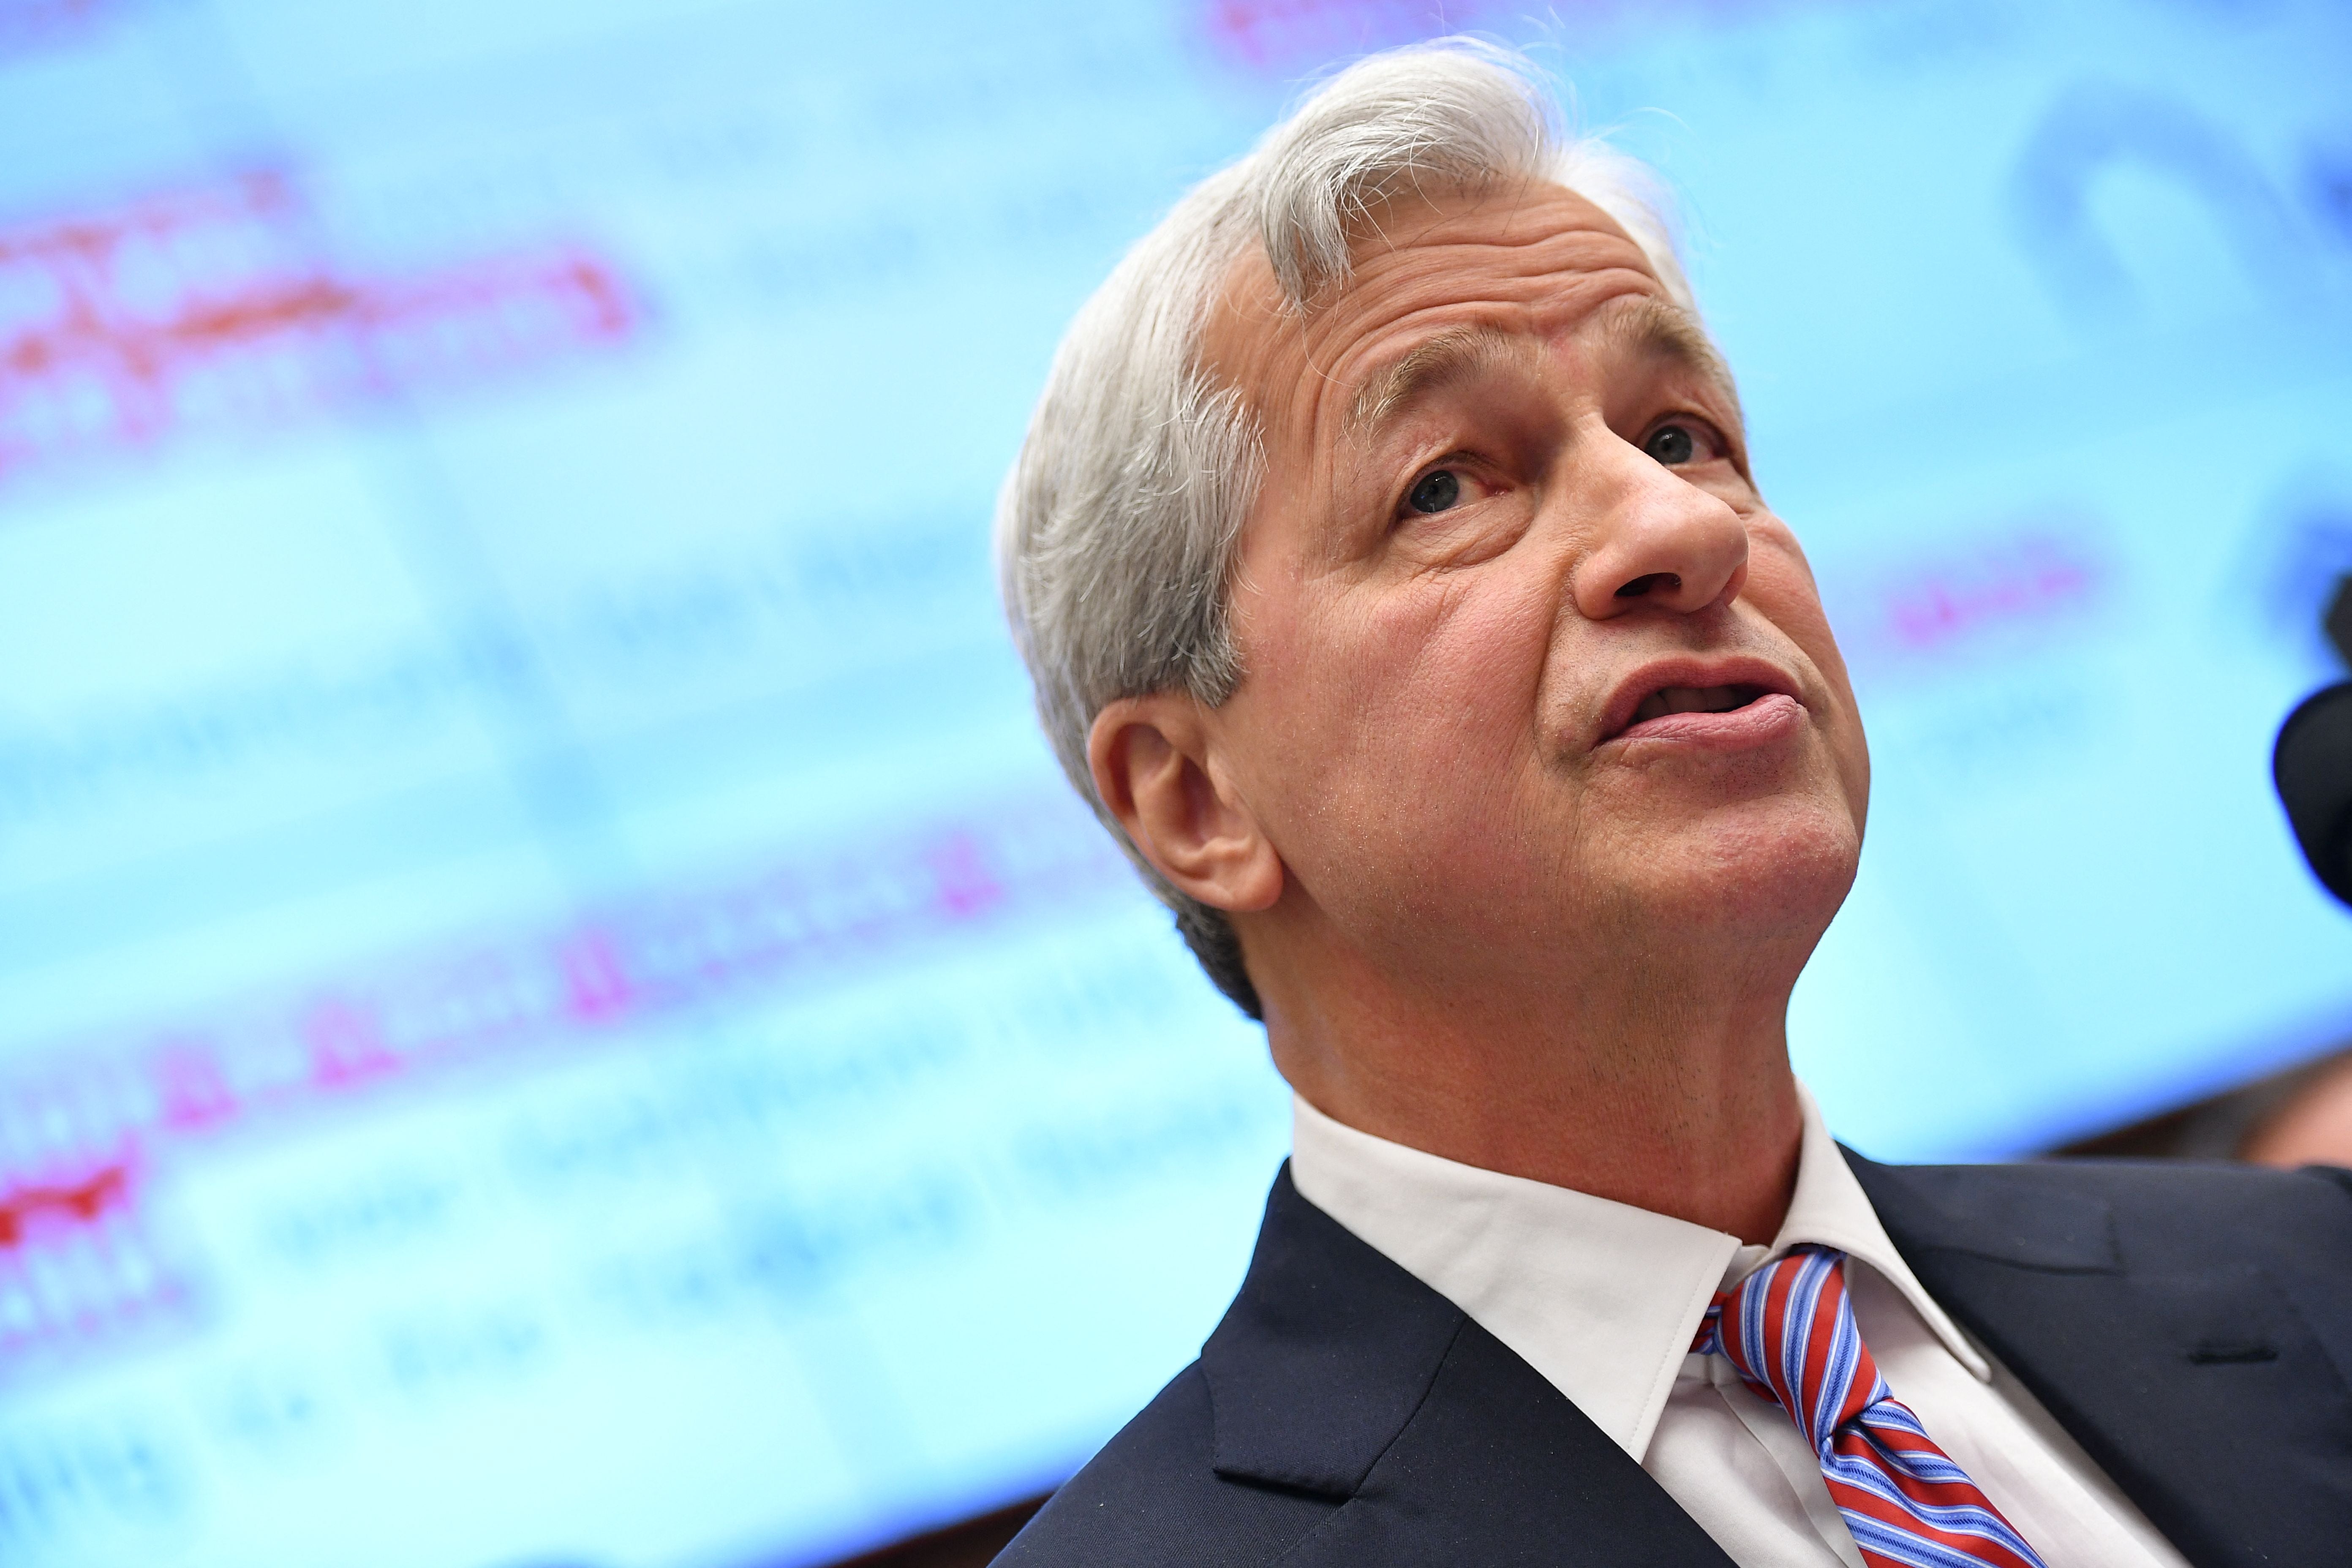 JP Morgan Chase CEO Jamie Dimon is one of a number of influential corporate leaders calling for more companies to embrace second-chance hiring.